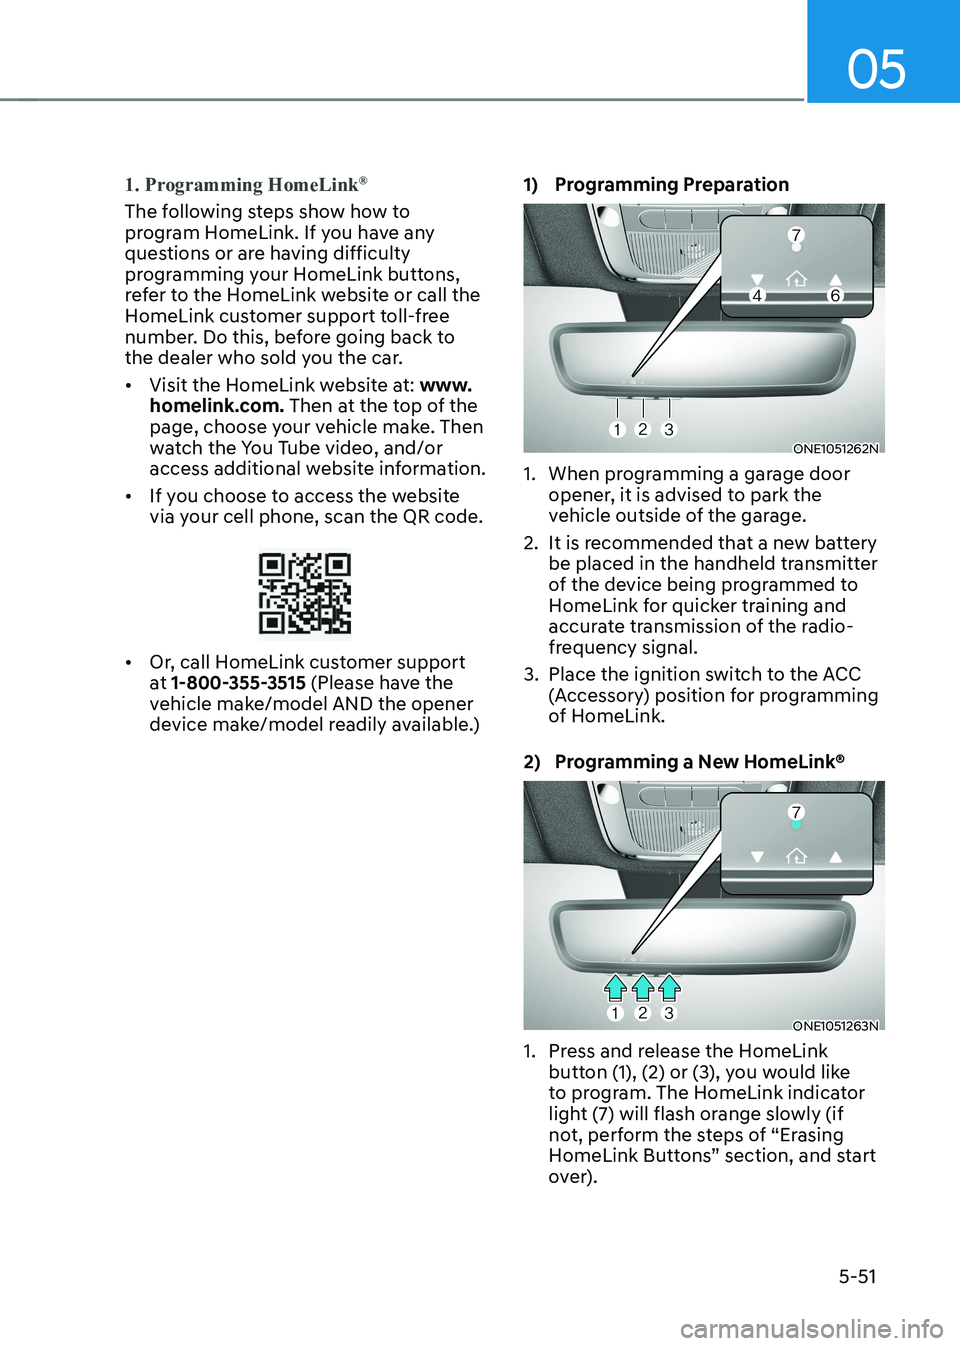 HYUNDAI IONIQ 5 2023  Owners Manual 05
5-51
1. Programming HomeLink®
The following steps show how to  
program HomeLink. If you have any 
questions or are having difficulty 
programming your HomeLink buttons, 
refer to the HomeLink web